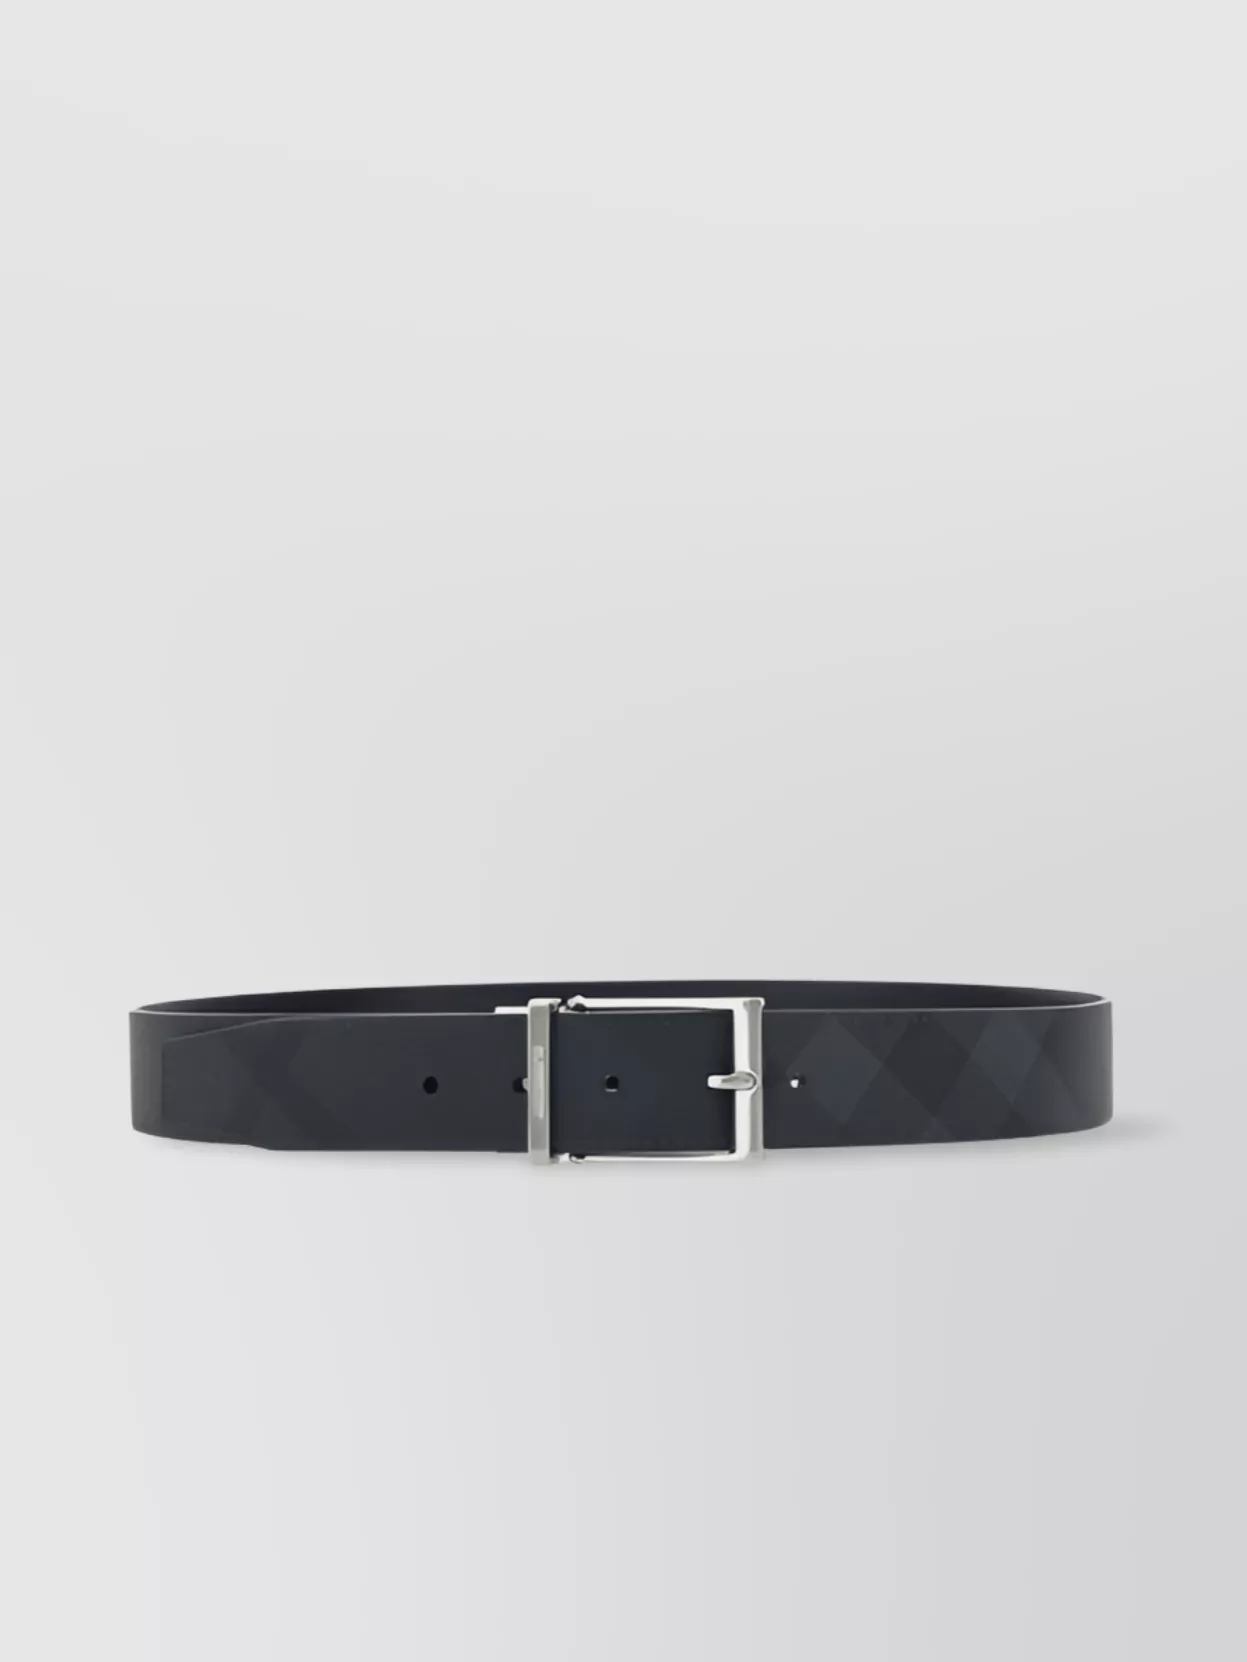 Burberry Belt Featuring Iconic Tartan Print And Metal Buckle In Black